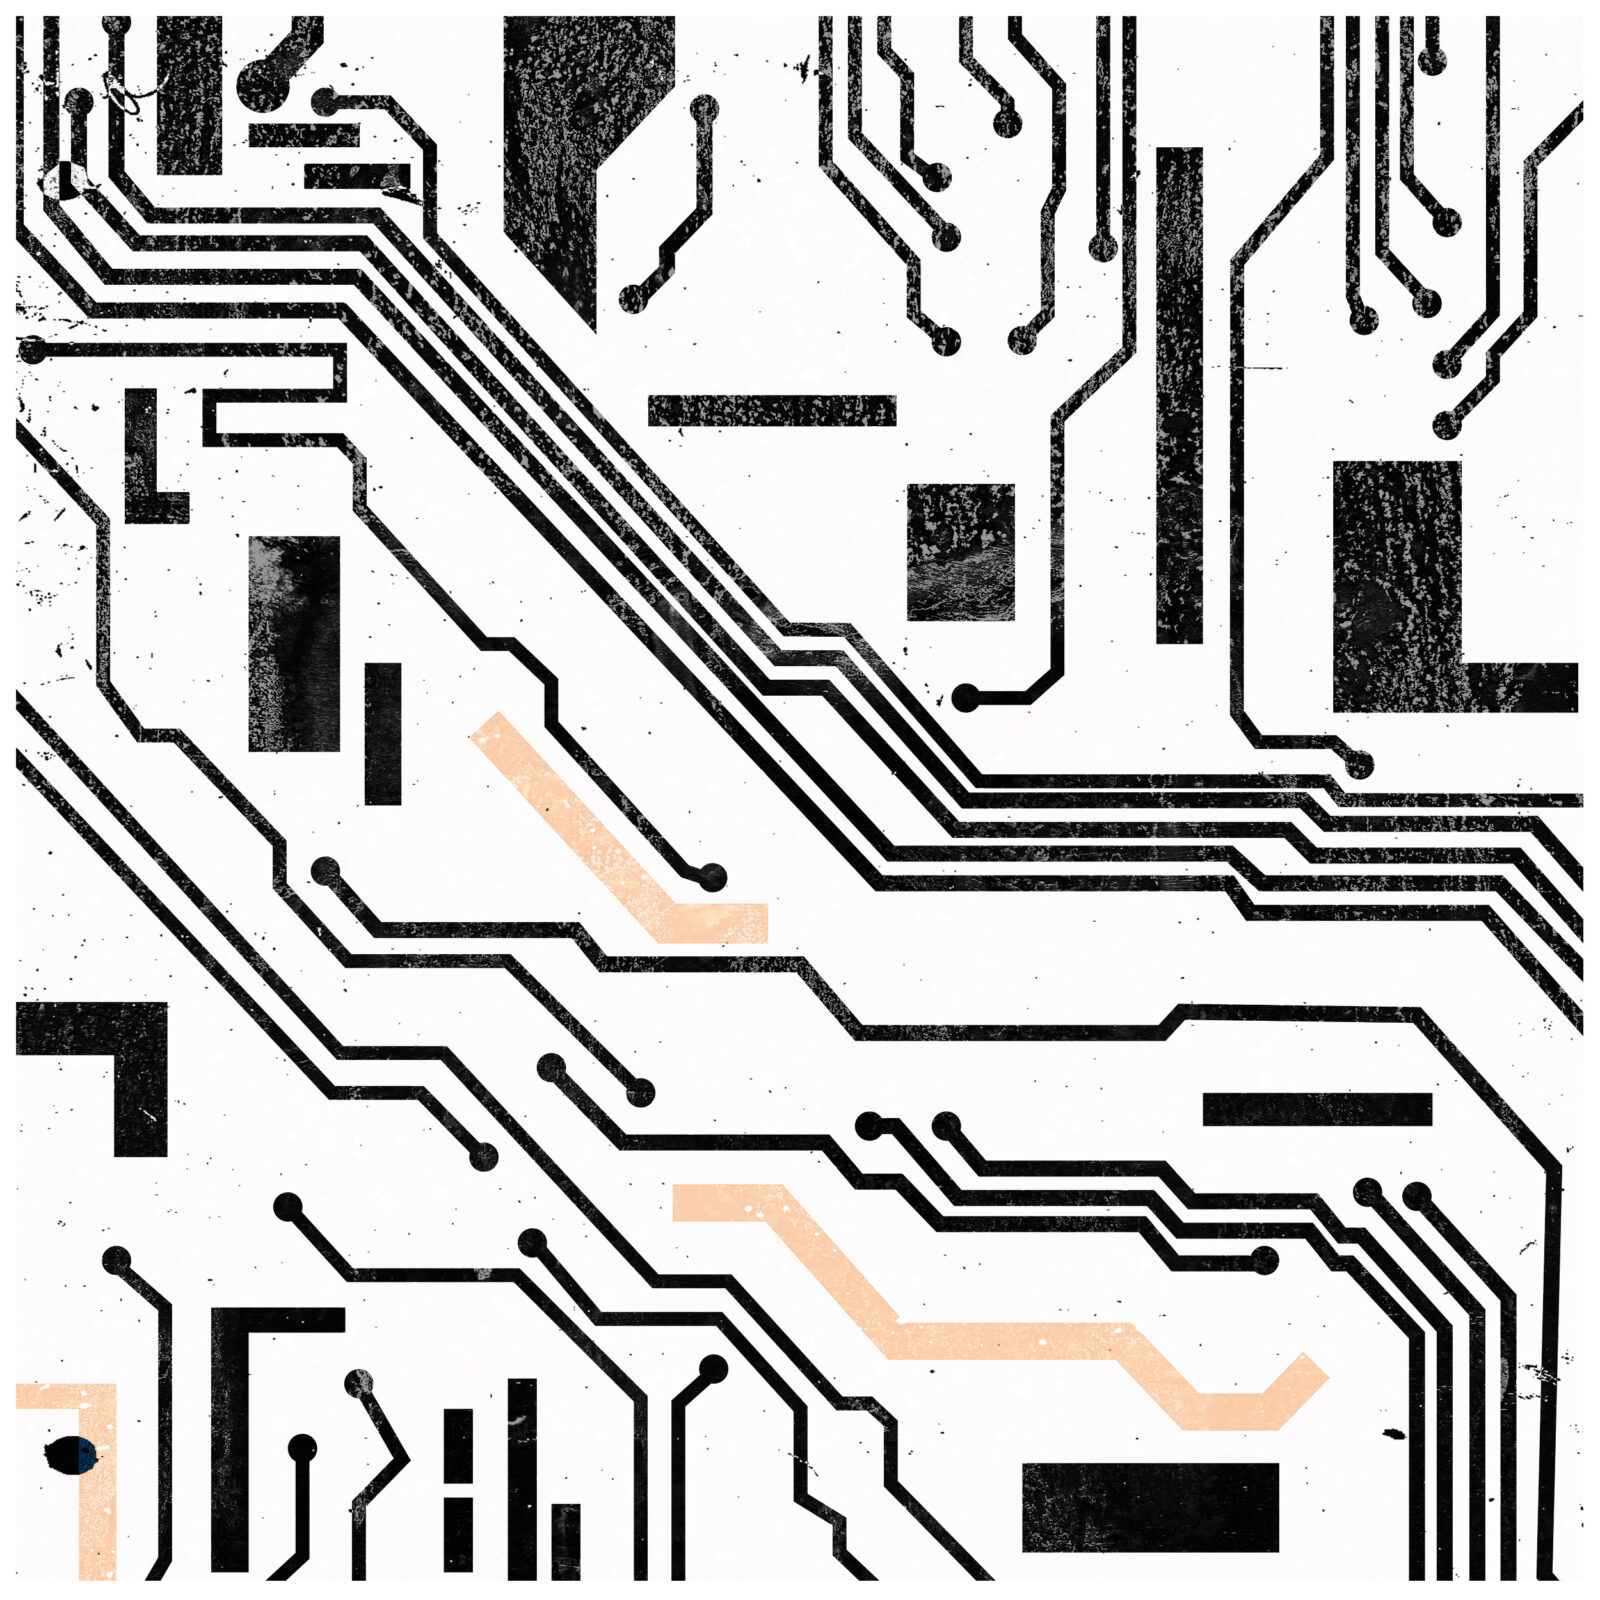 A minimalist geometric illustration in black, white and peach depicts an artistic take on the classic computer chip, with geometric lines, blocks and nodes etching an angular pattern across the textured white background.